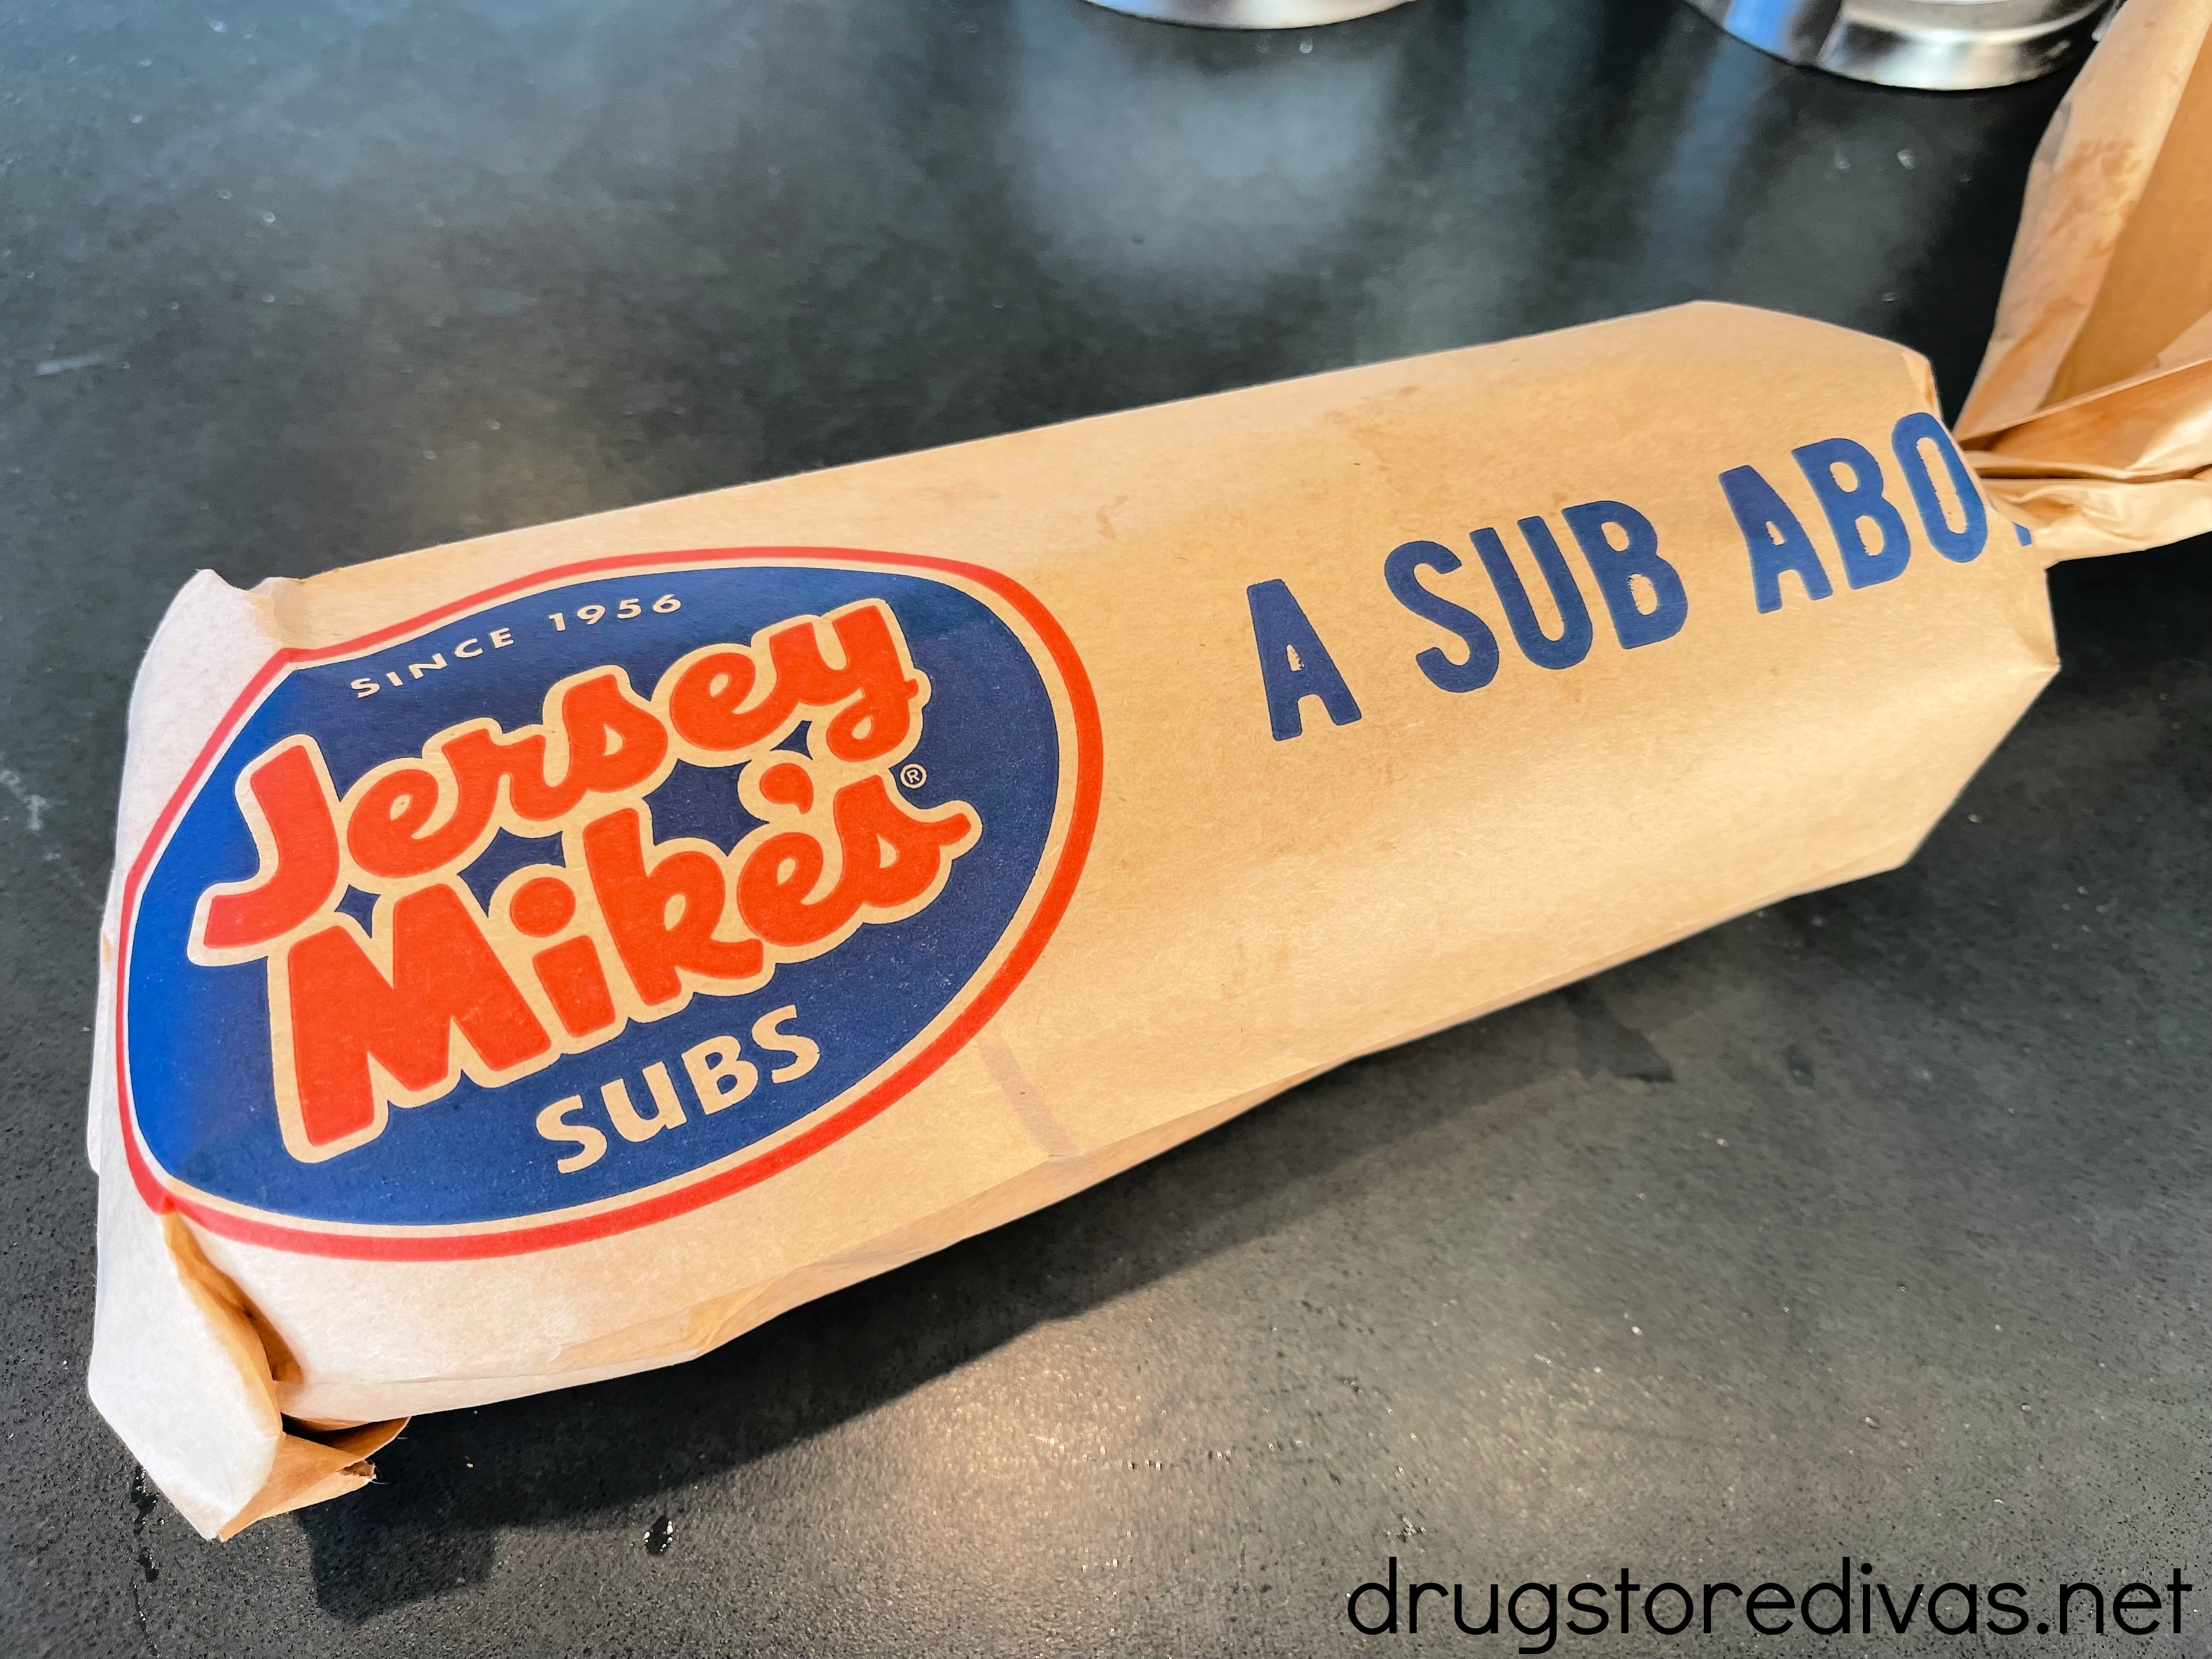 A sandwich from Jersey Mike's.